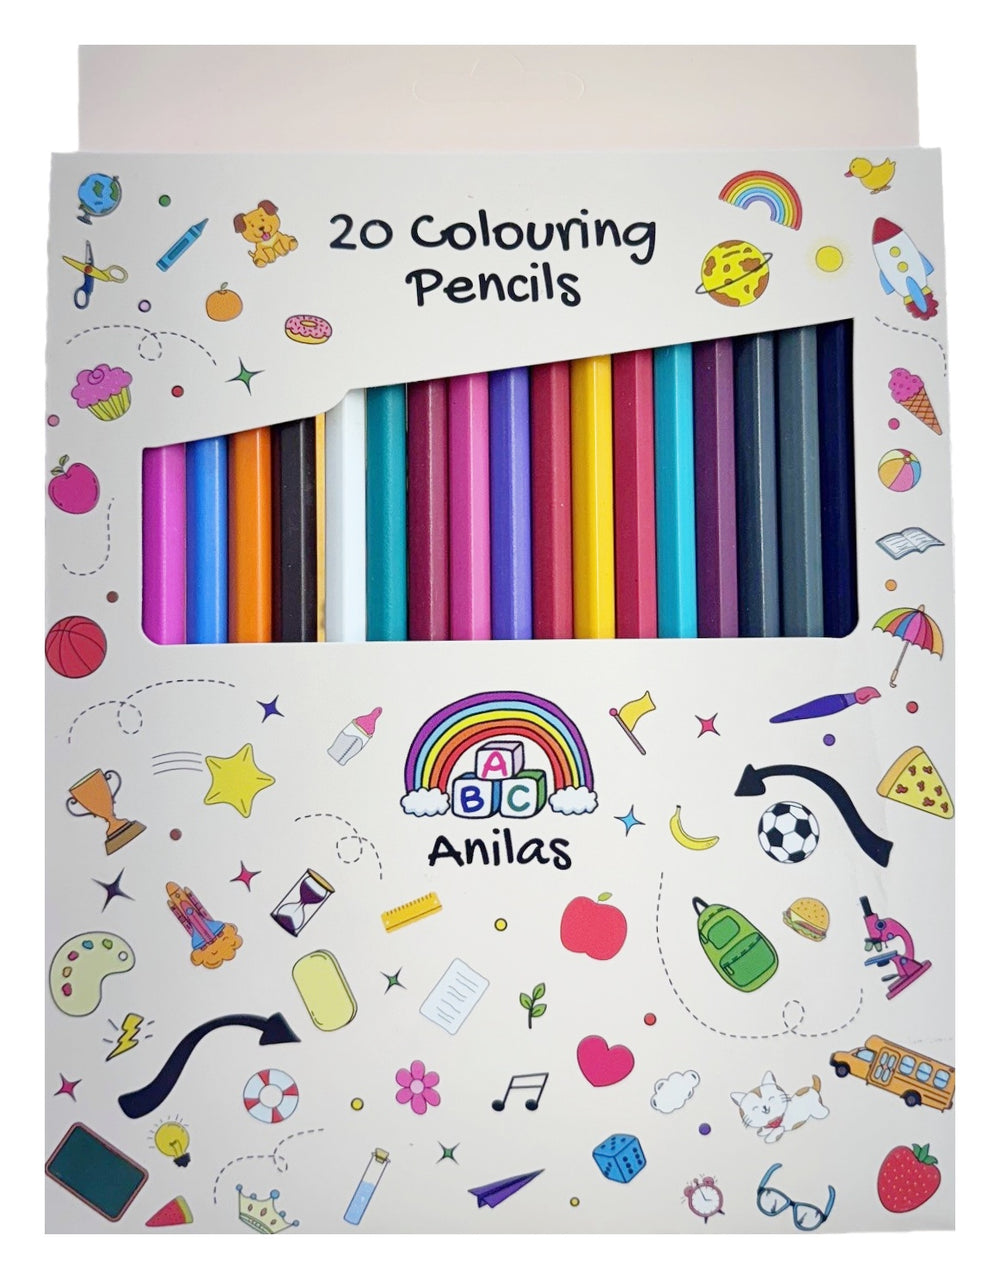 Full Size Assorted Colouring Pencils (Set of 20) - Anilas UK